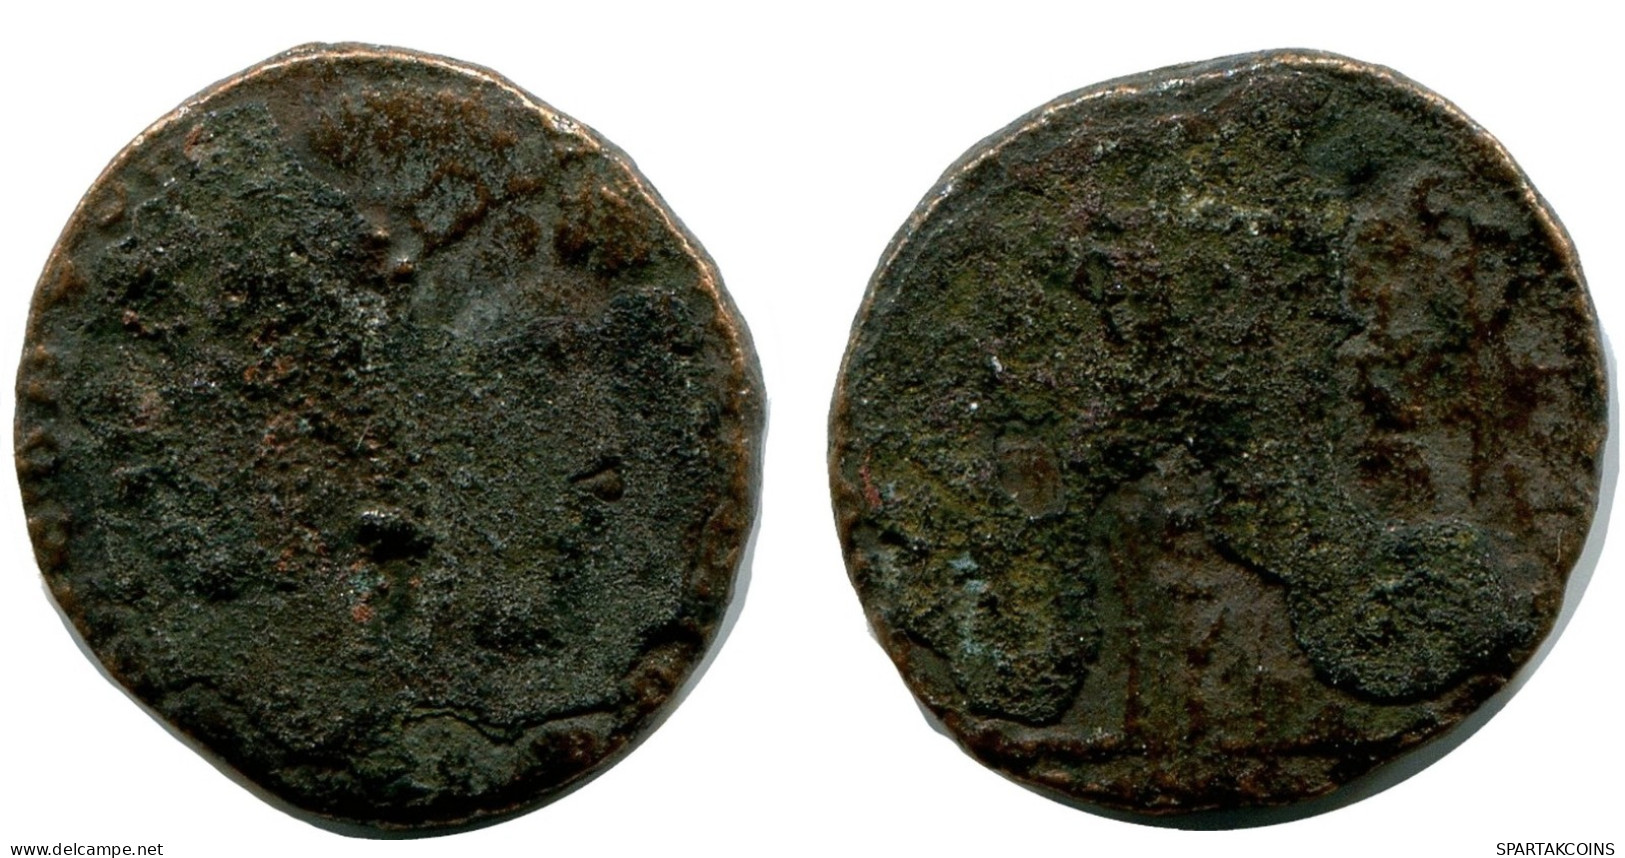 ROMAN Coin MINTED IN ALEKSANDRIA FROM THE ROYAL ONTARIO MUSEUM #ANC10165.14.D.A - Der Christlischen Kaiser (307 / 363)